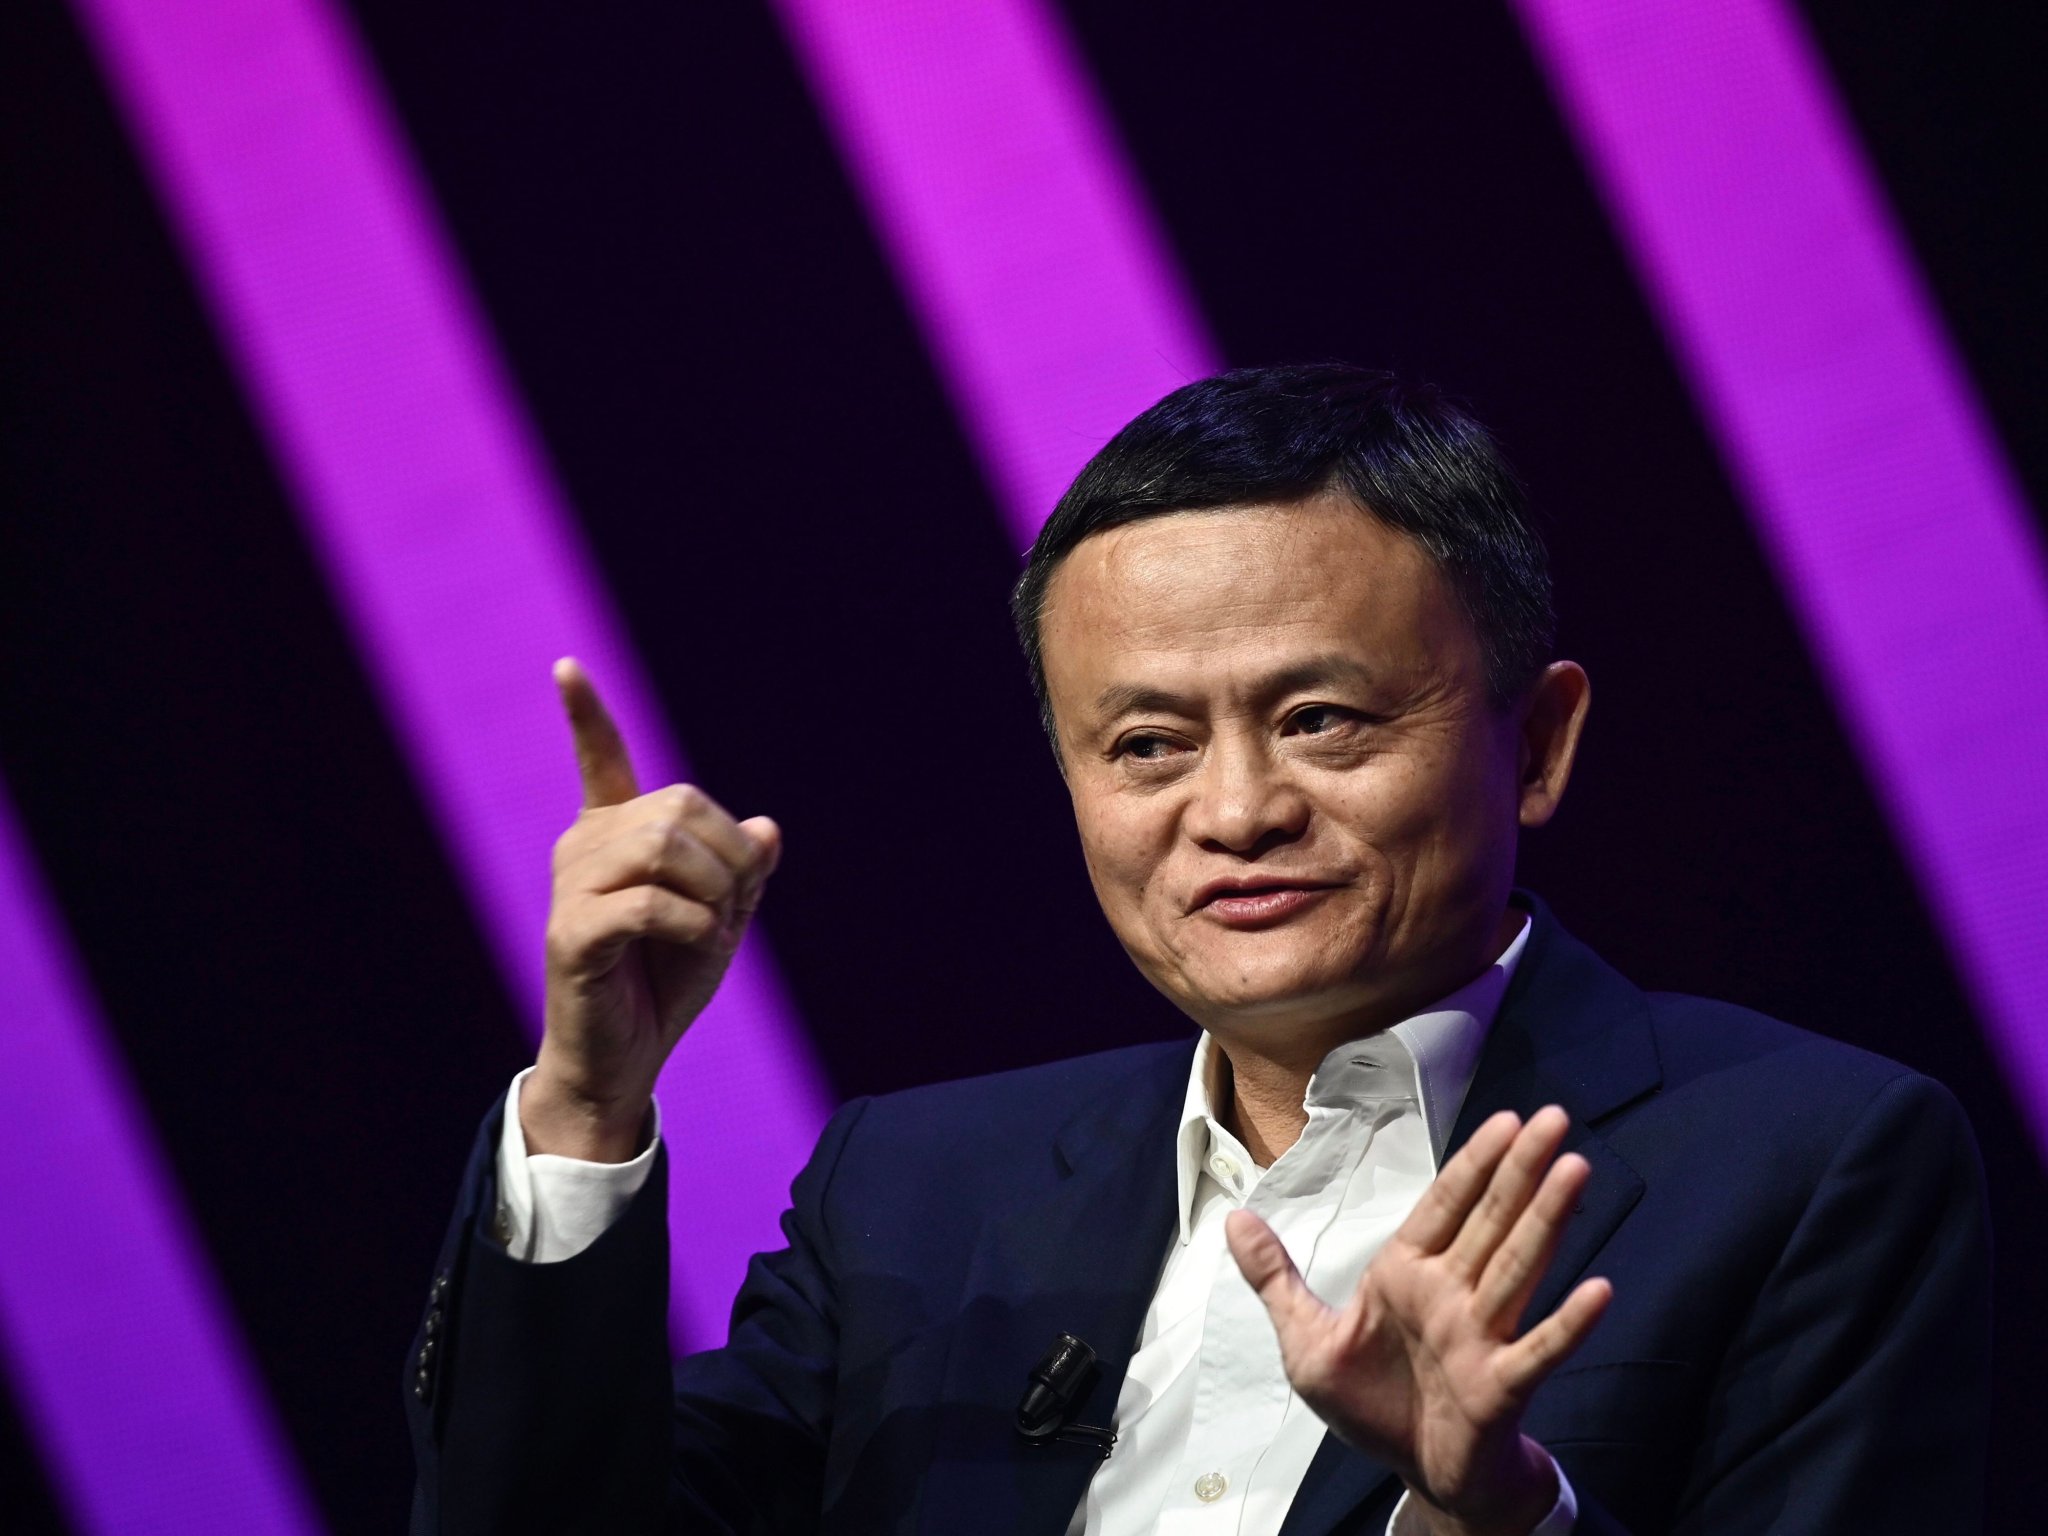 Alibaba Founder Jack Ma Has Fallen Off The Radar. Here Are Some Clues Why